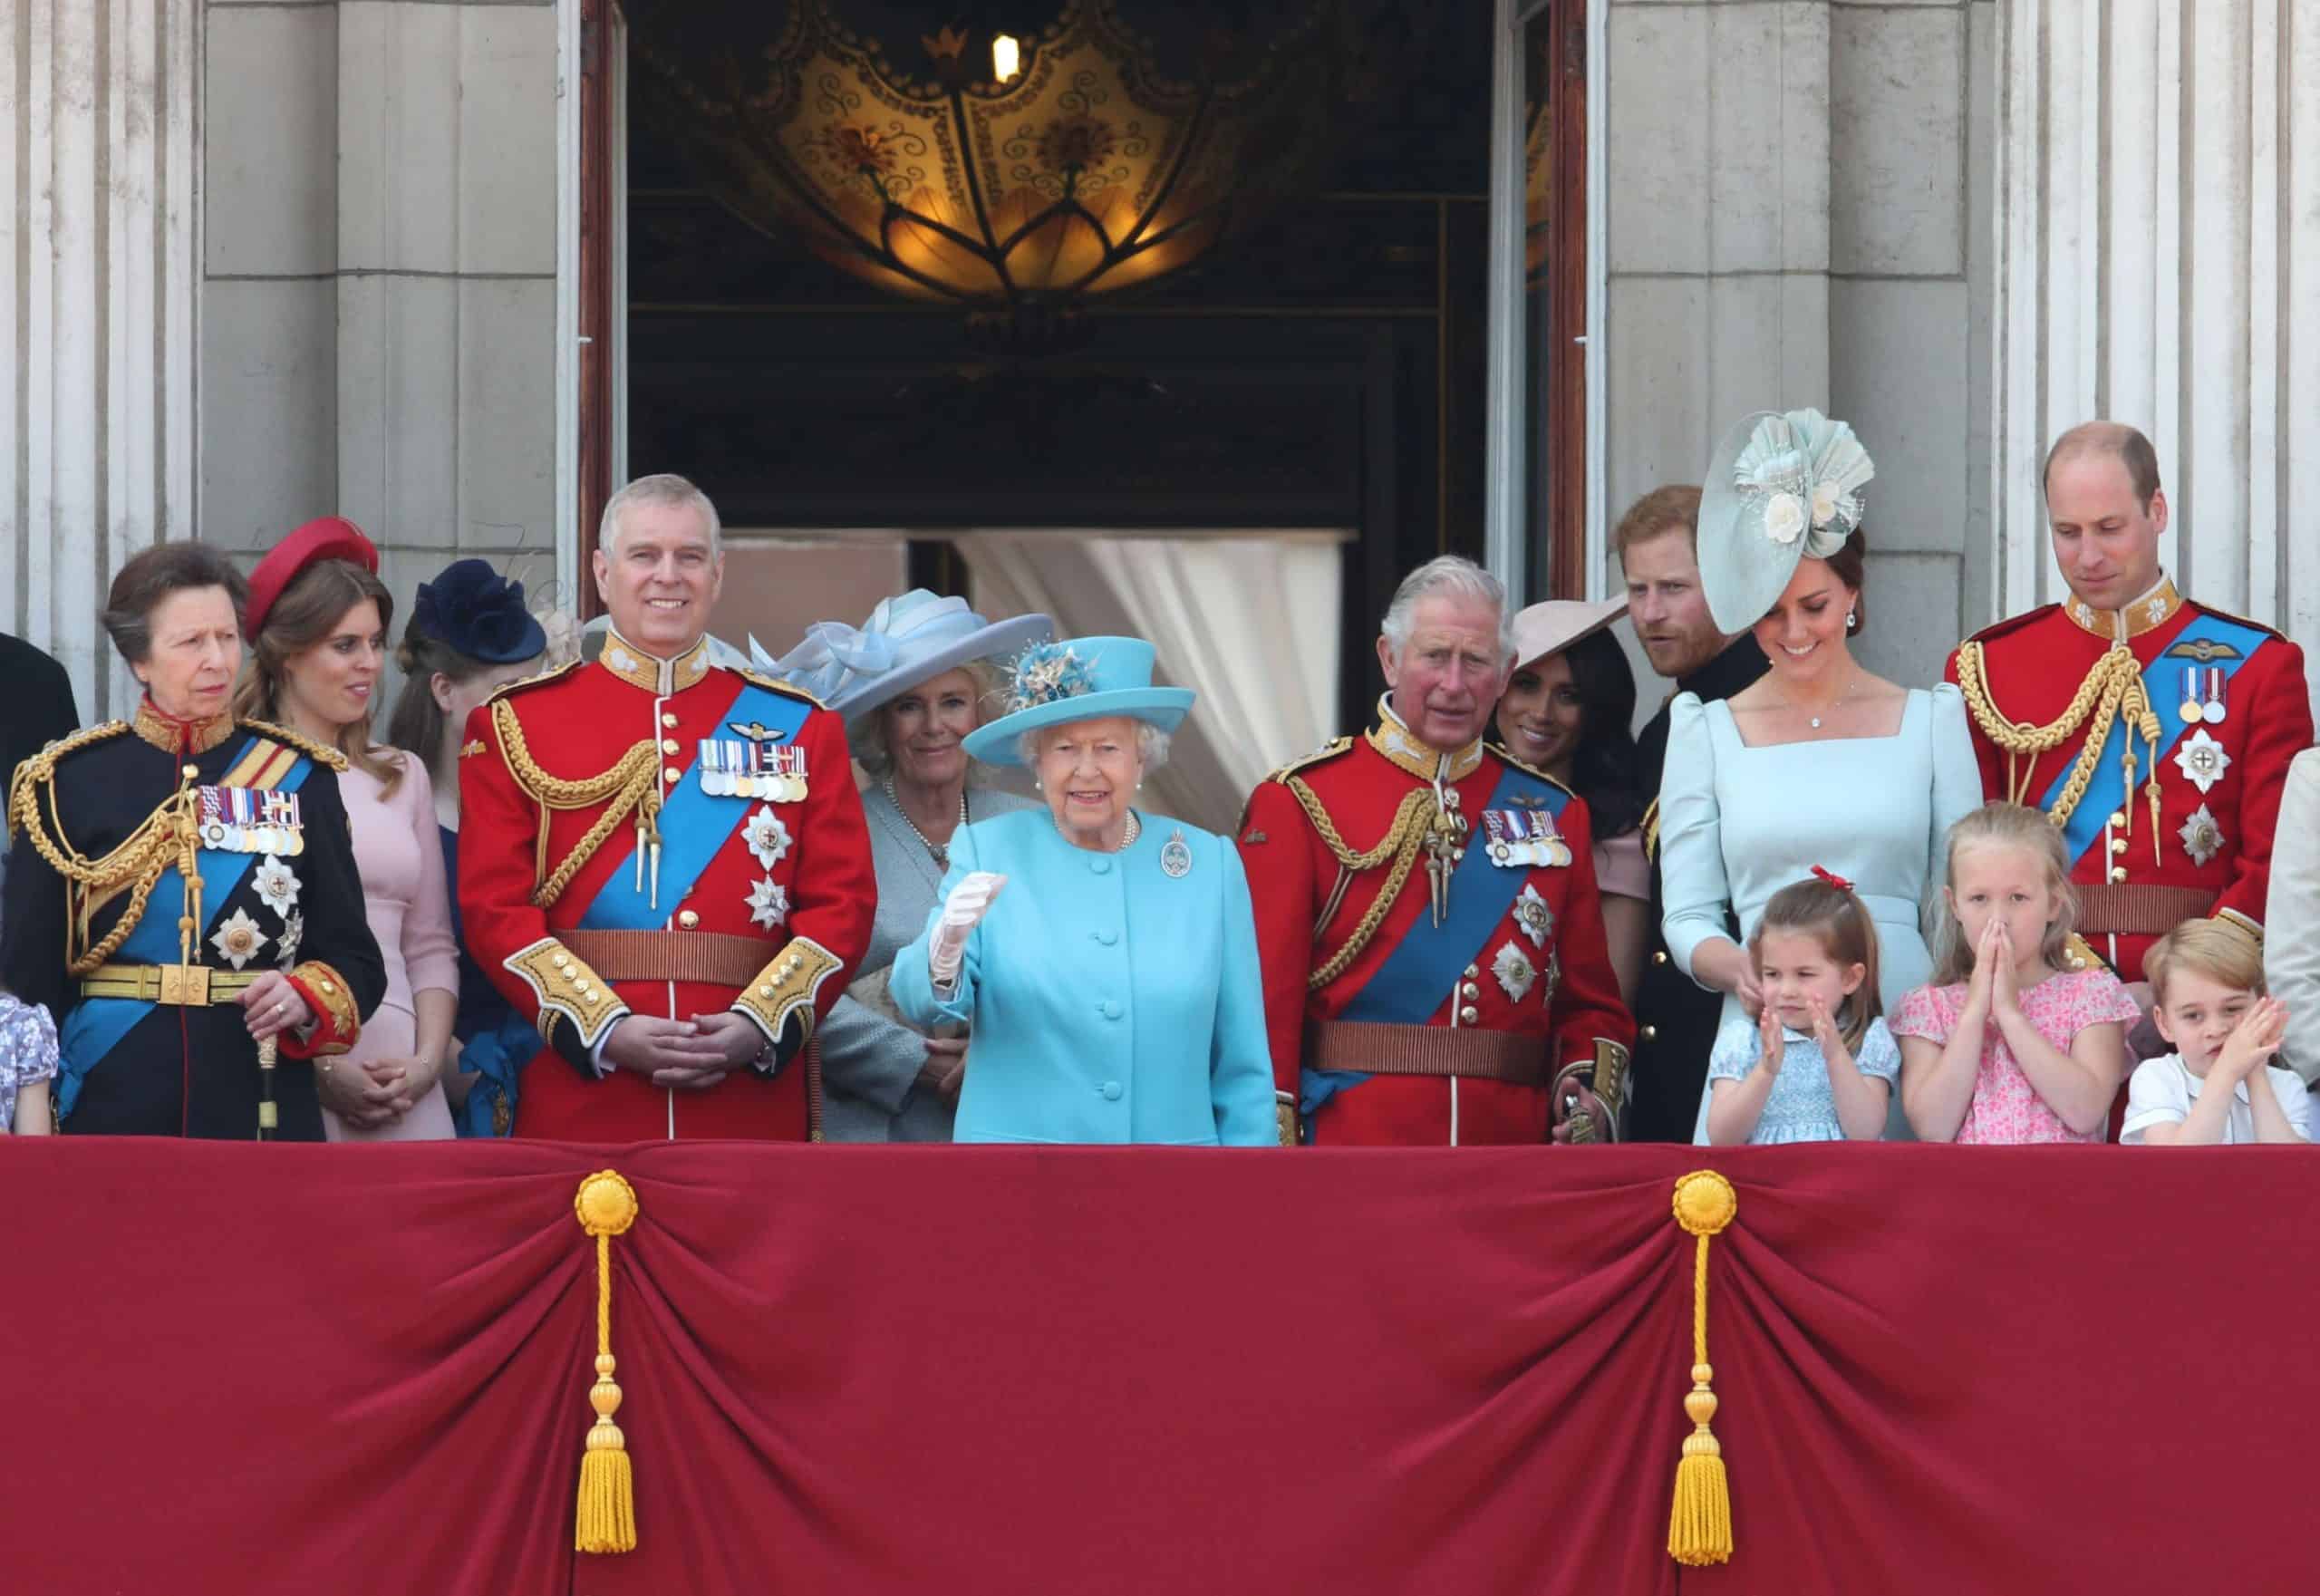 Some members of royal family ‘have been behaving like free riders’ – any ideas who?